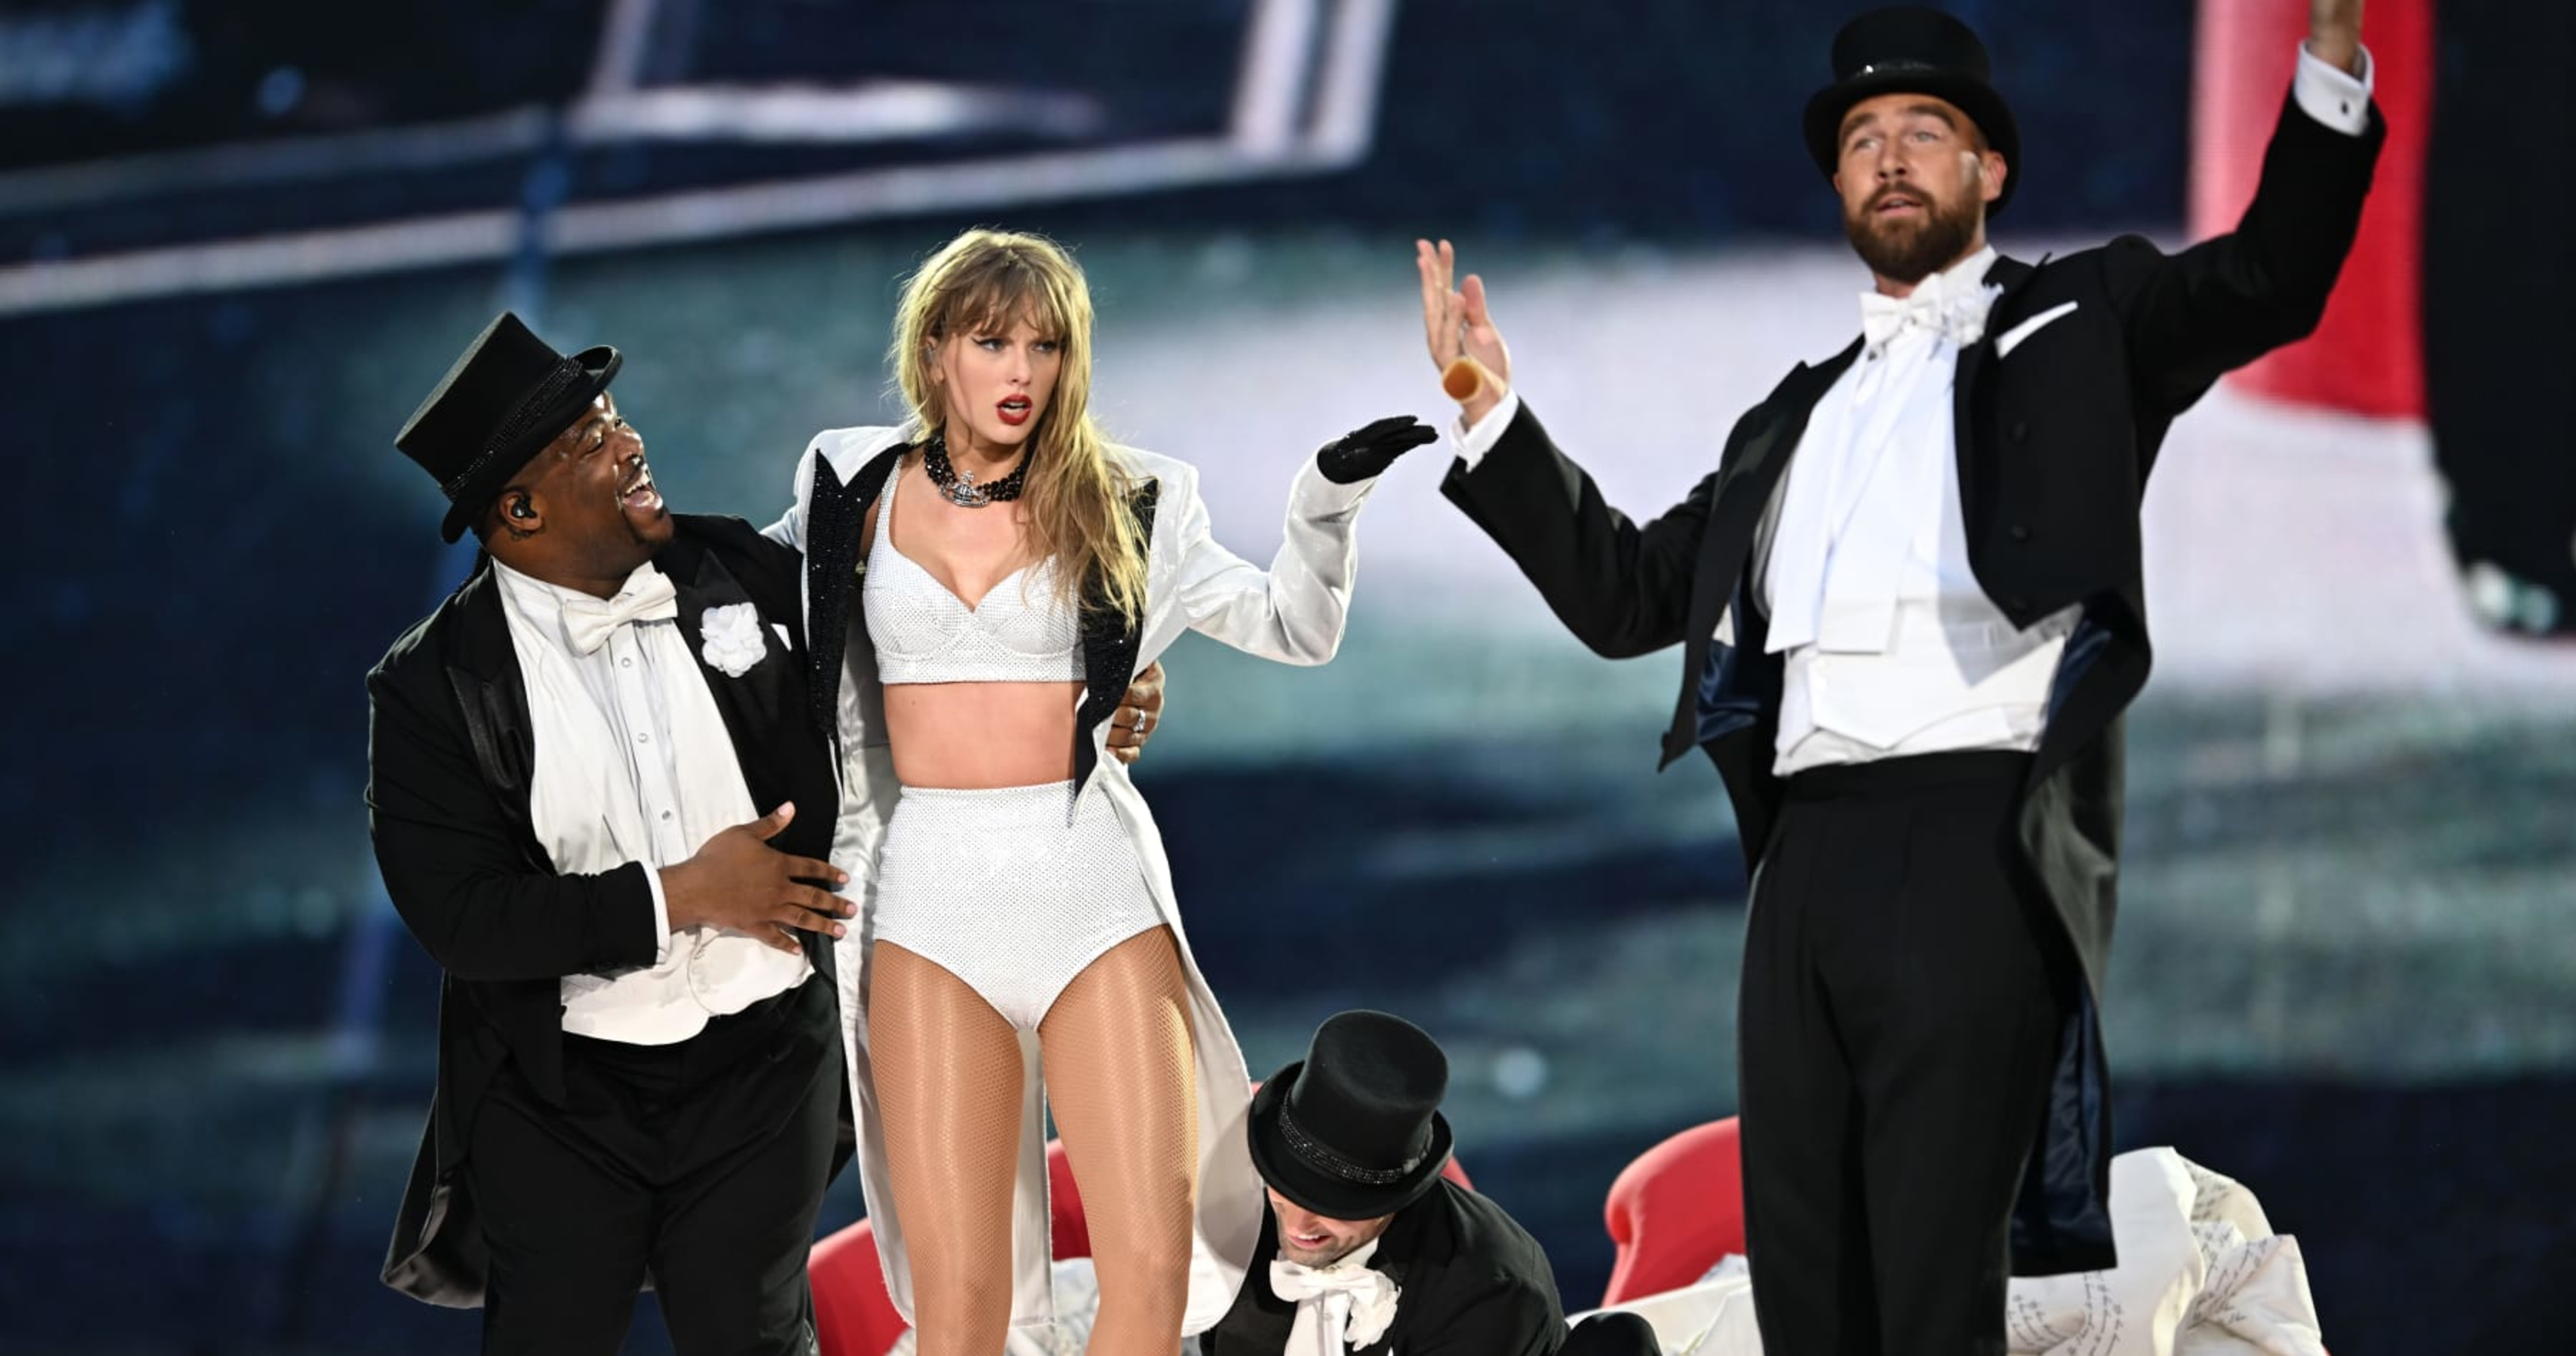 Travis Kelce Hints He Paid $3M for Taylor Swift, Family to Attend Super Bowl in Suite